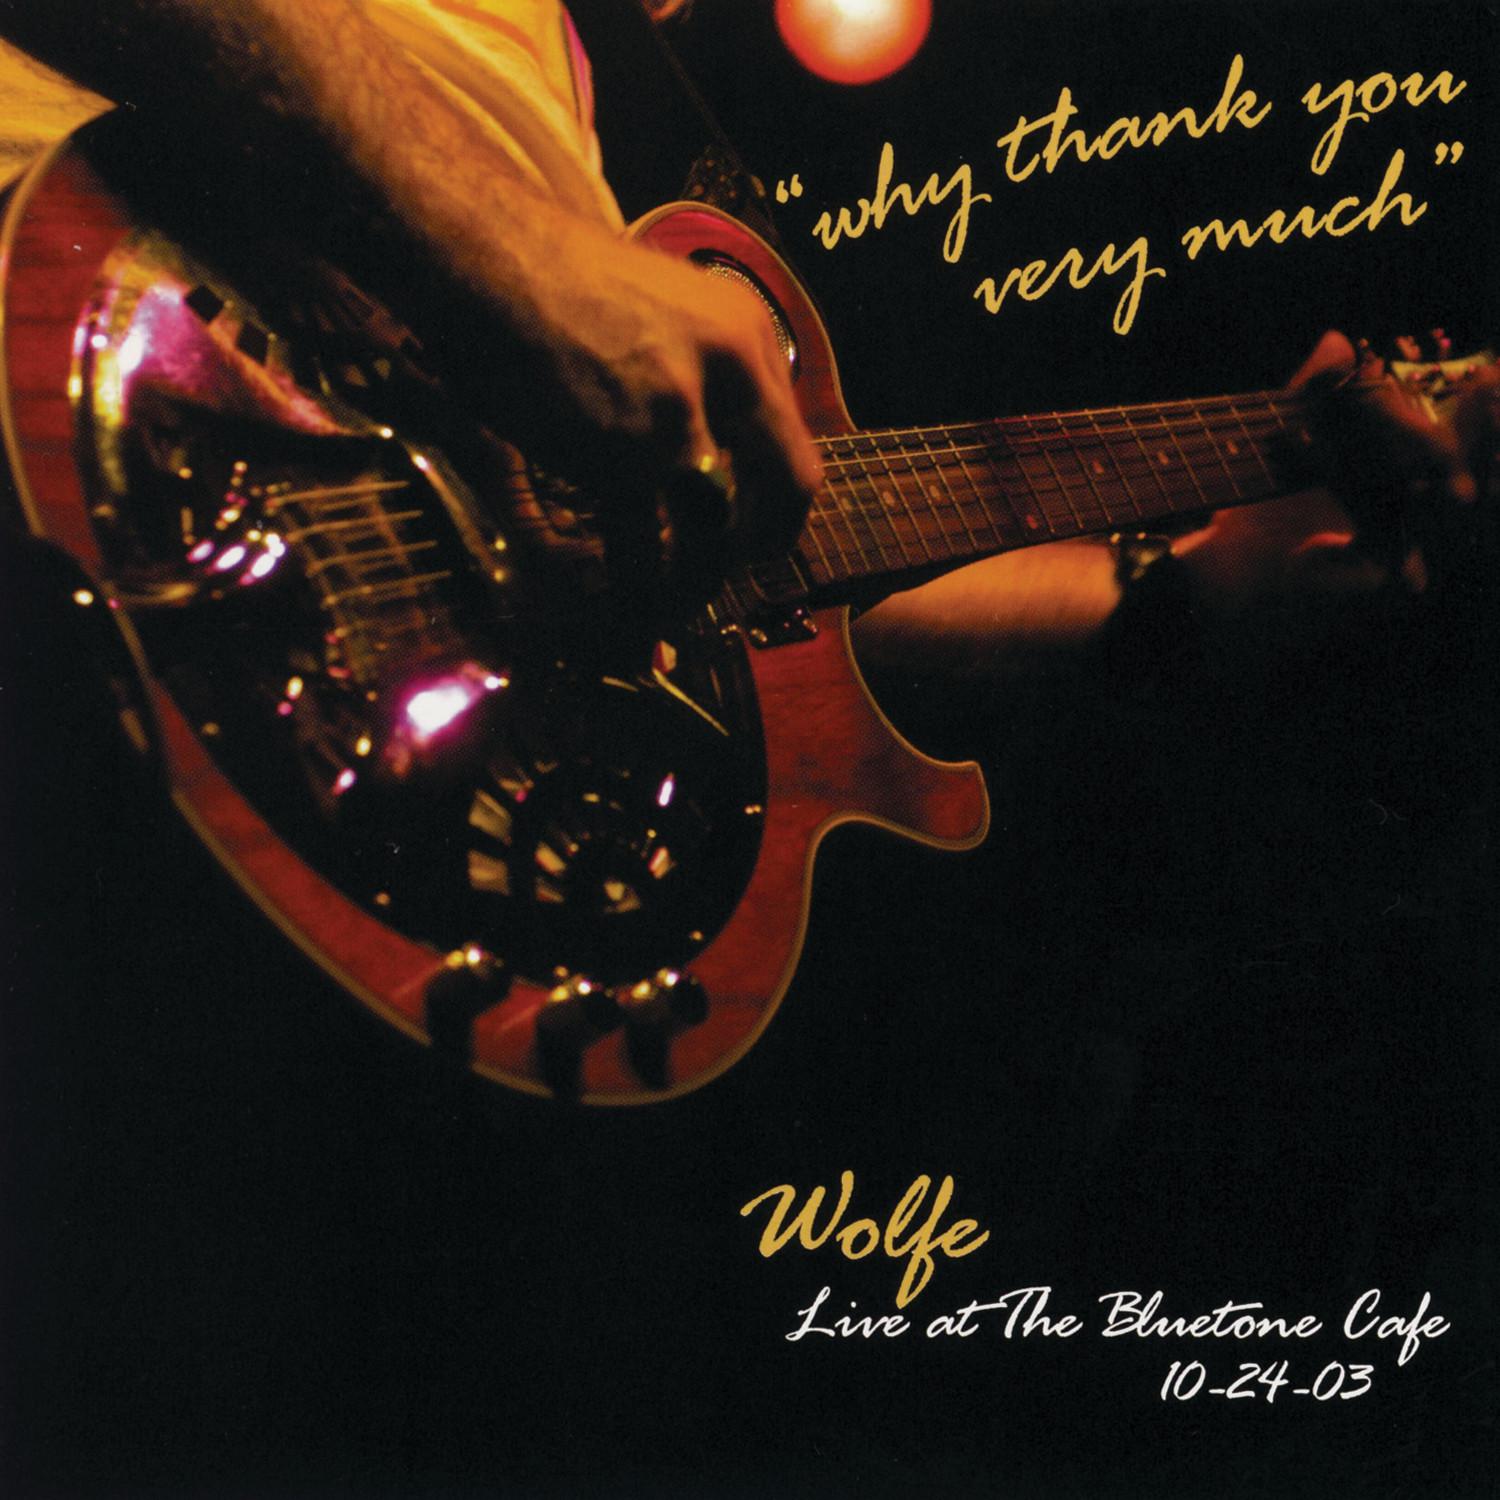 Why Thank You Very Much: Live at the Bluetone Cafe